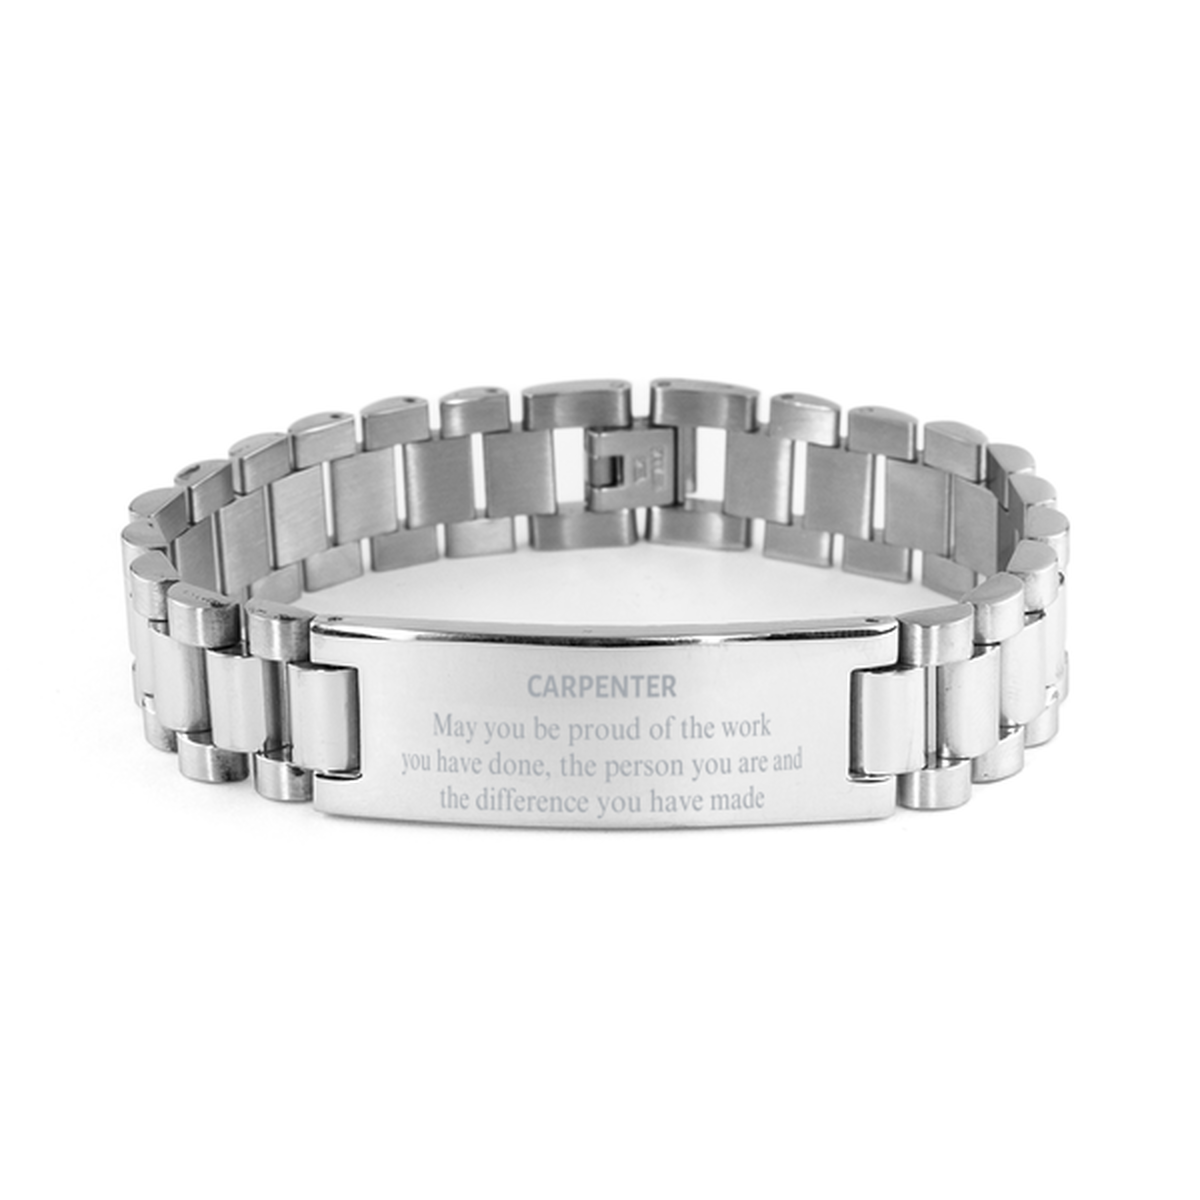 Carpenter May you be proud of the work you have done, Retirement Carpenter Ladder Stainless Steel Bracelet for Colleague Appreciation Gifts Amazing for Carpenter